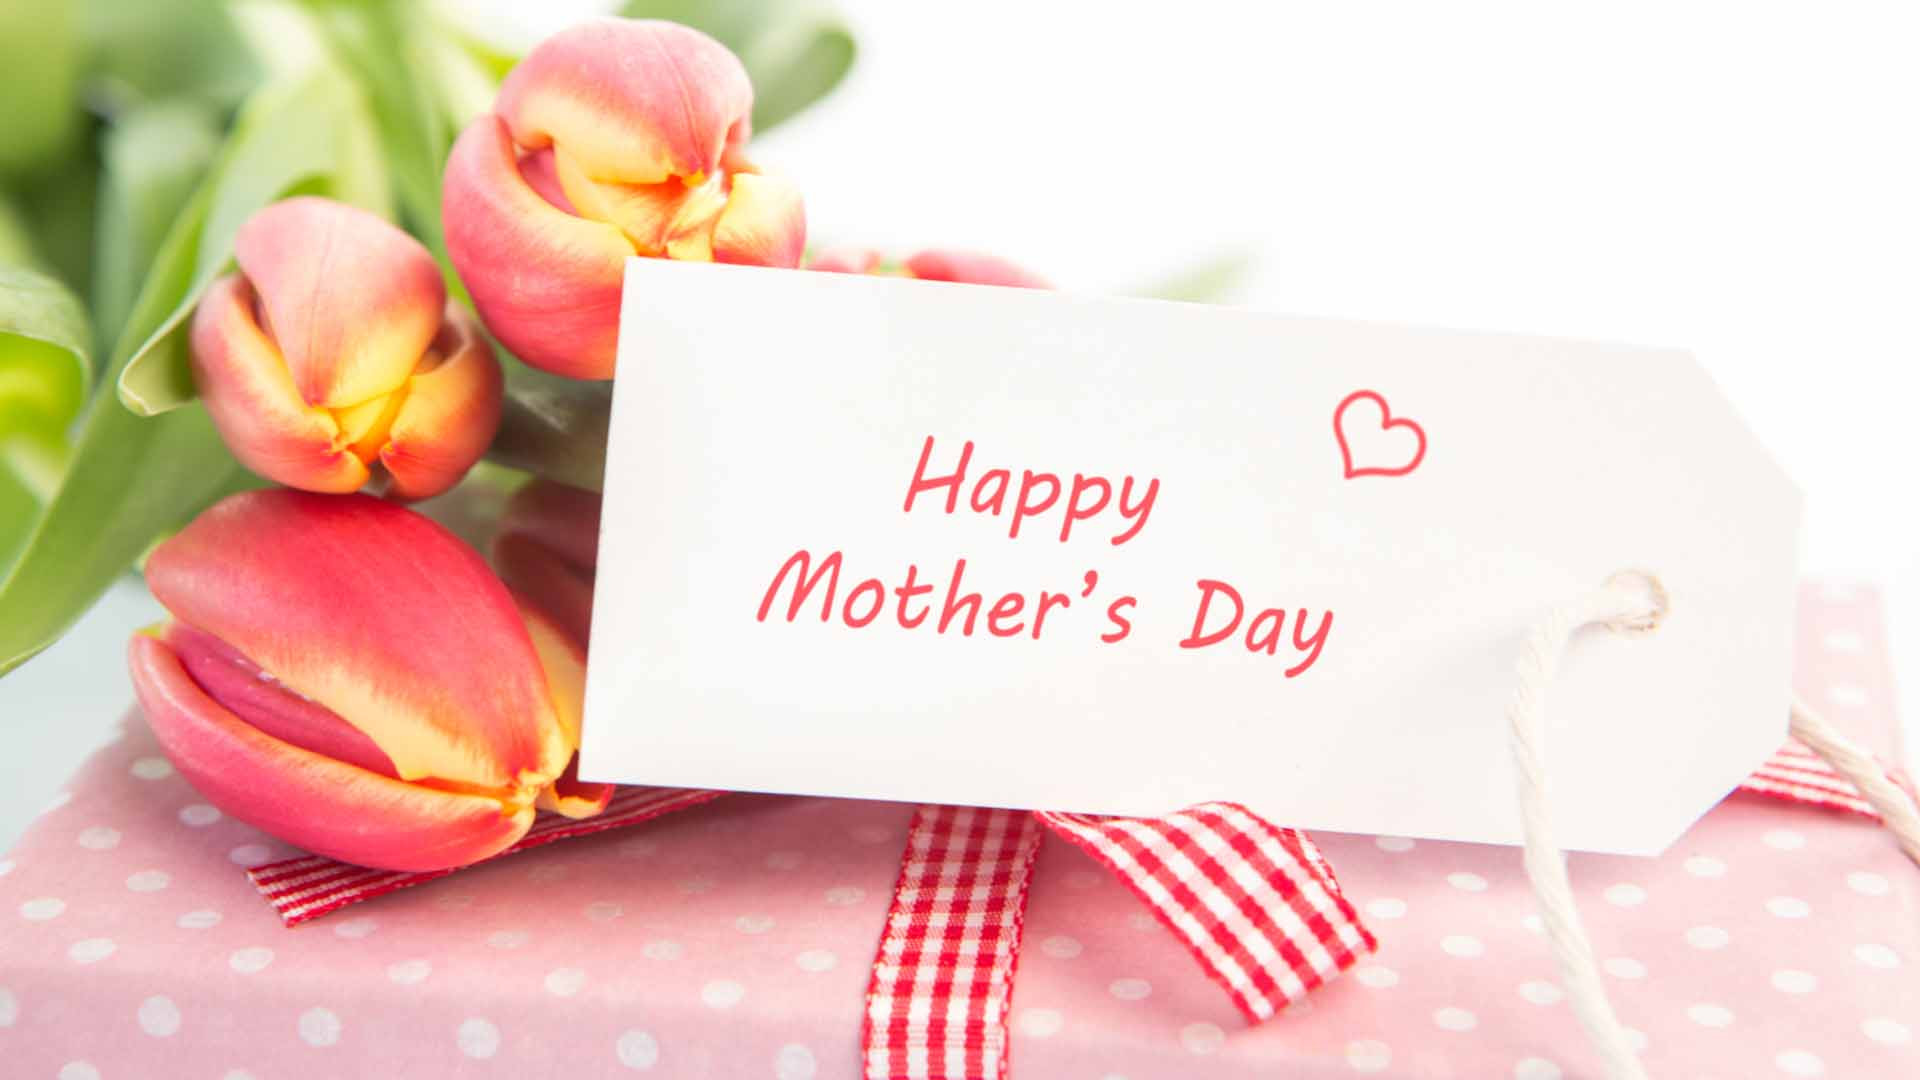 Delivery Mothers Day Gifts
 Best Flowers Delivery and Gifts options for Mother s Day